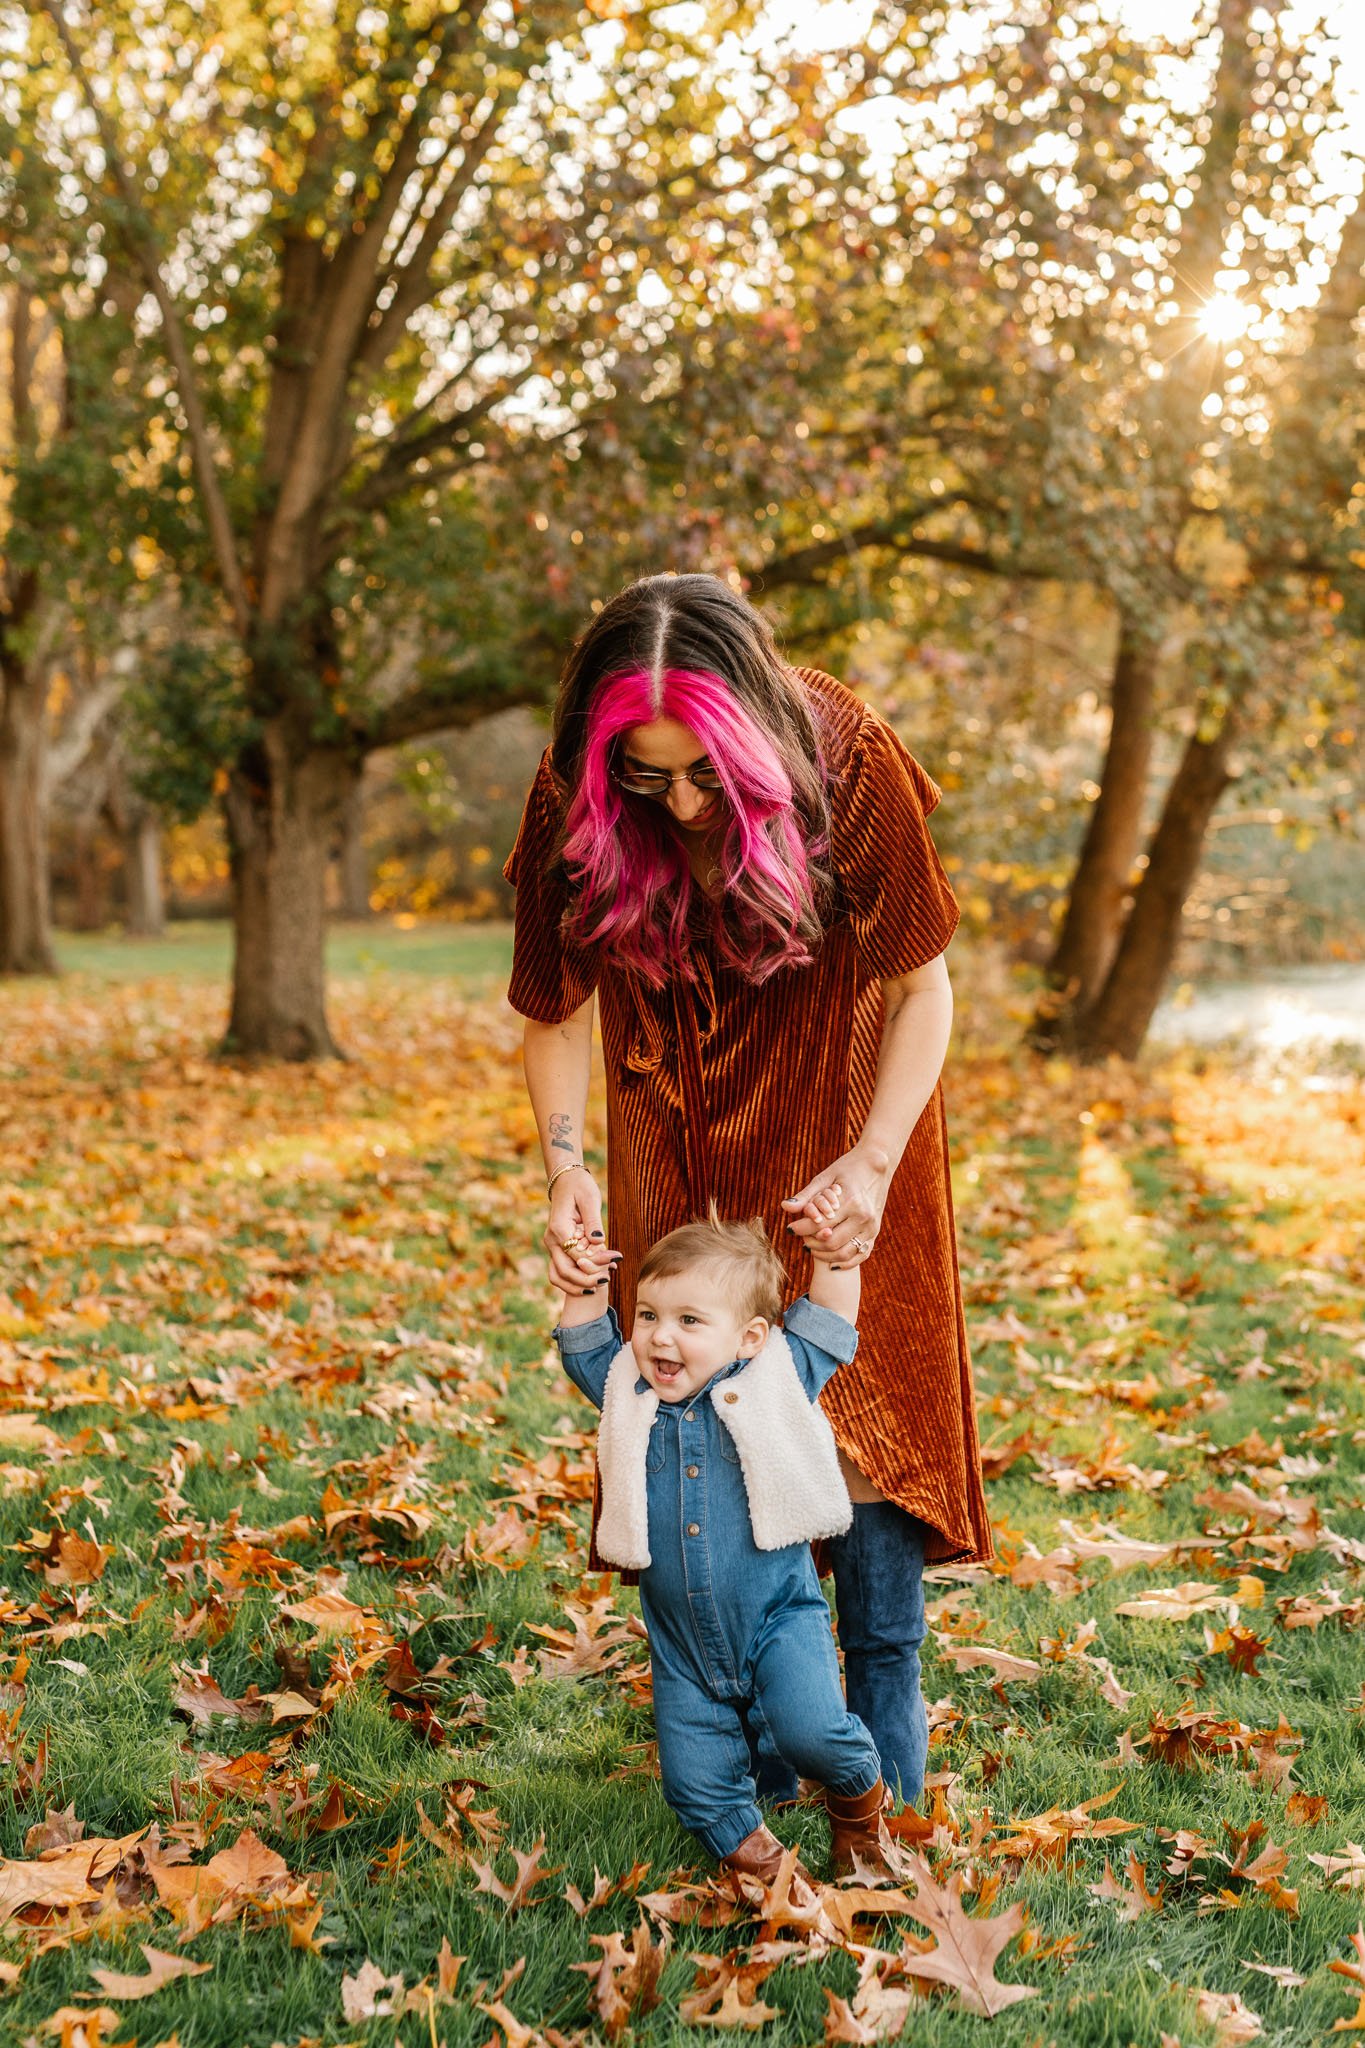  A mother helps her baby girl walk by holding her hands captured by Nicole Hawkins Photography in NJ. family portraits #NicoleHawkinsPhotography #NicoleHawkinsFamily #fallfamilyphotos #fallphotos #familyphotographerNJ #NJfallfamilypics 